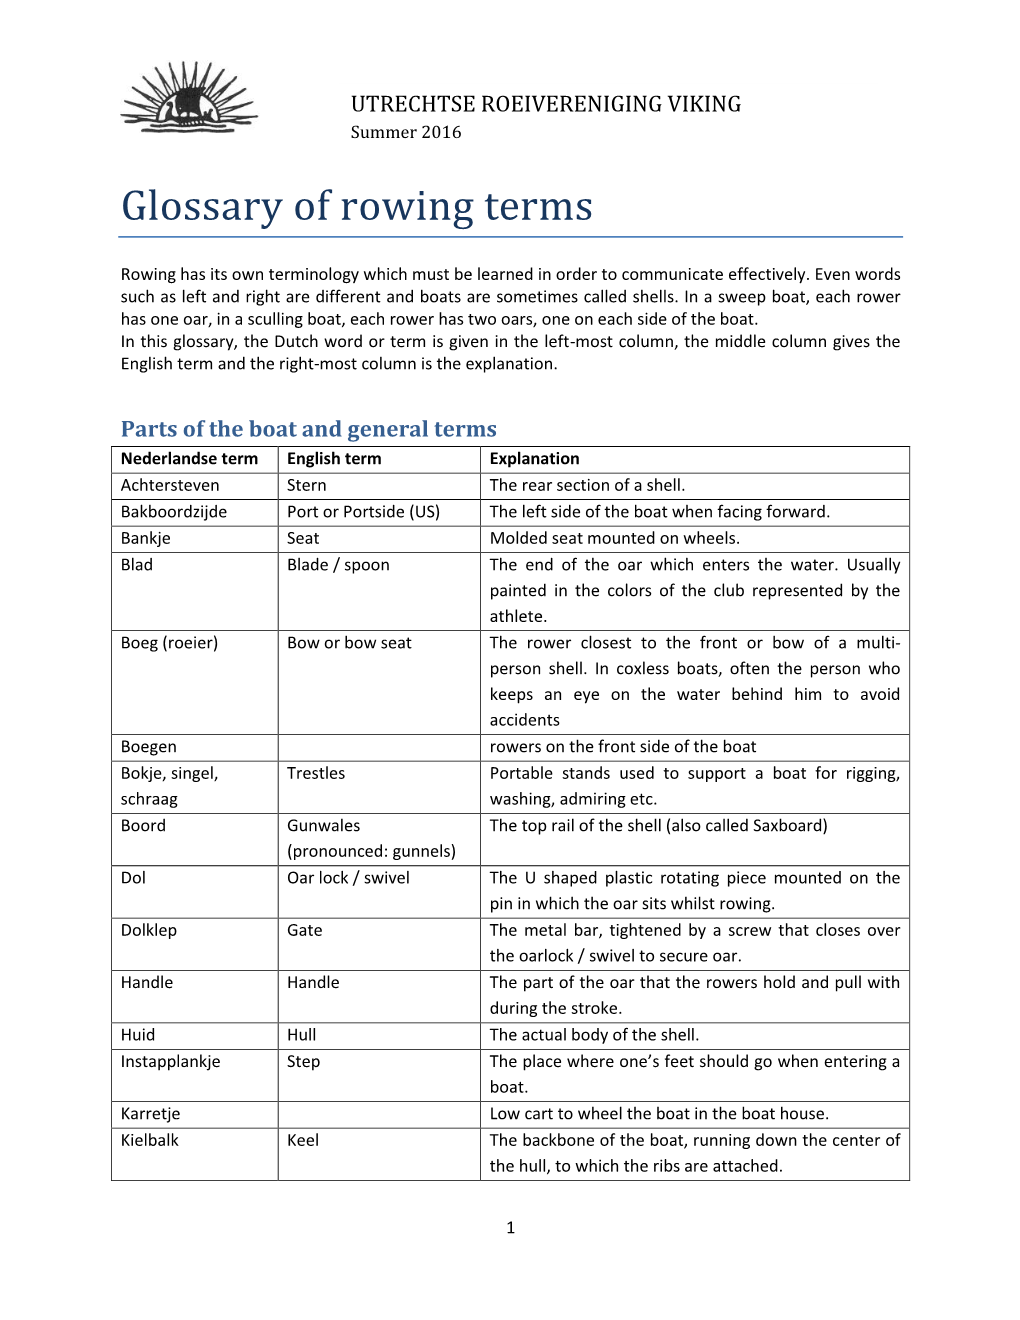 Glossary of Rowing Terms